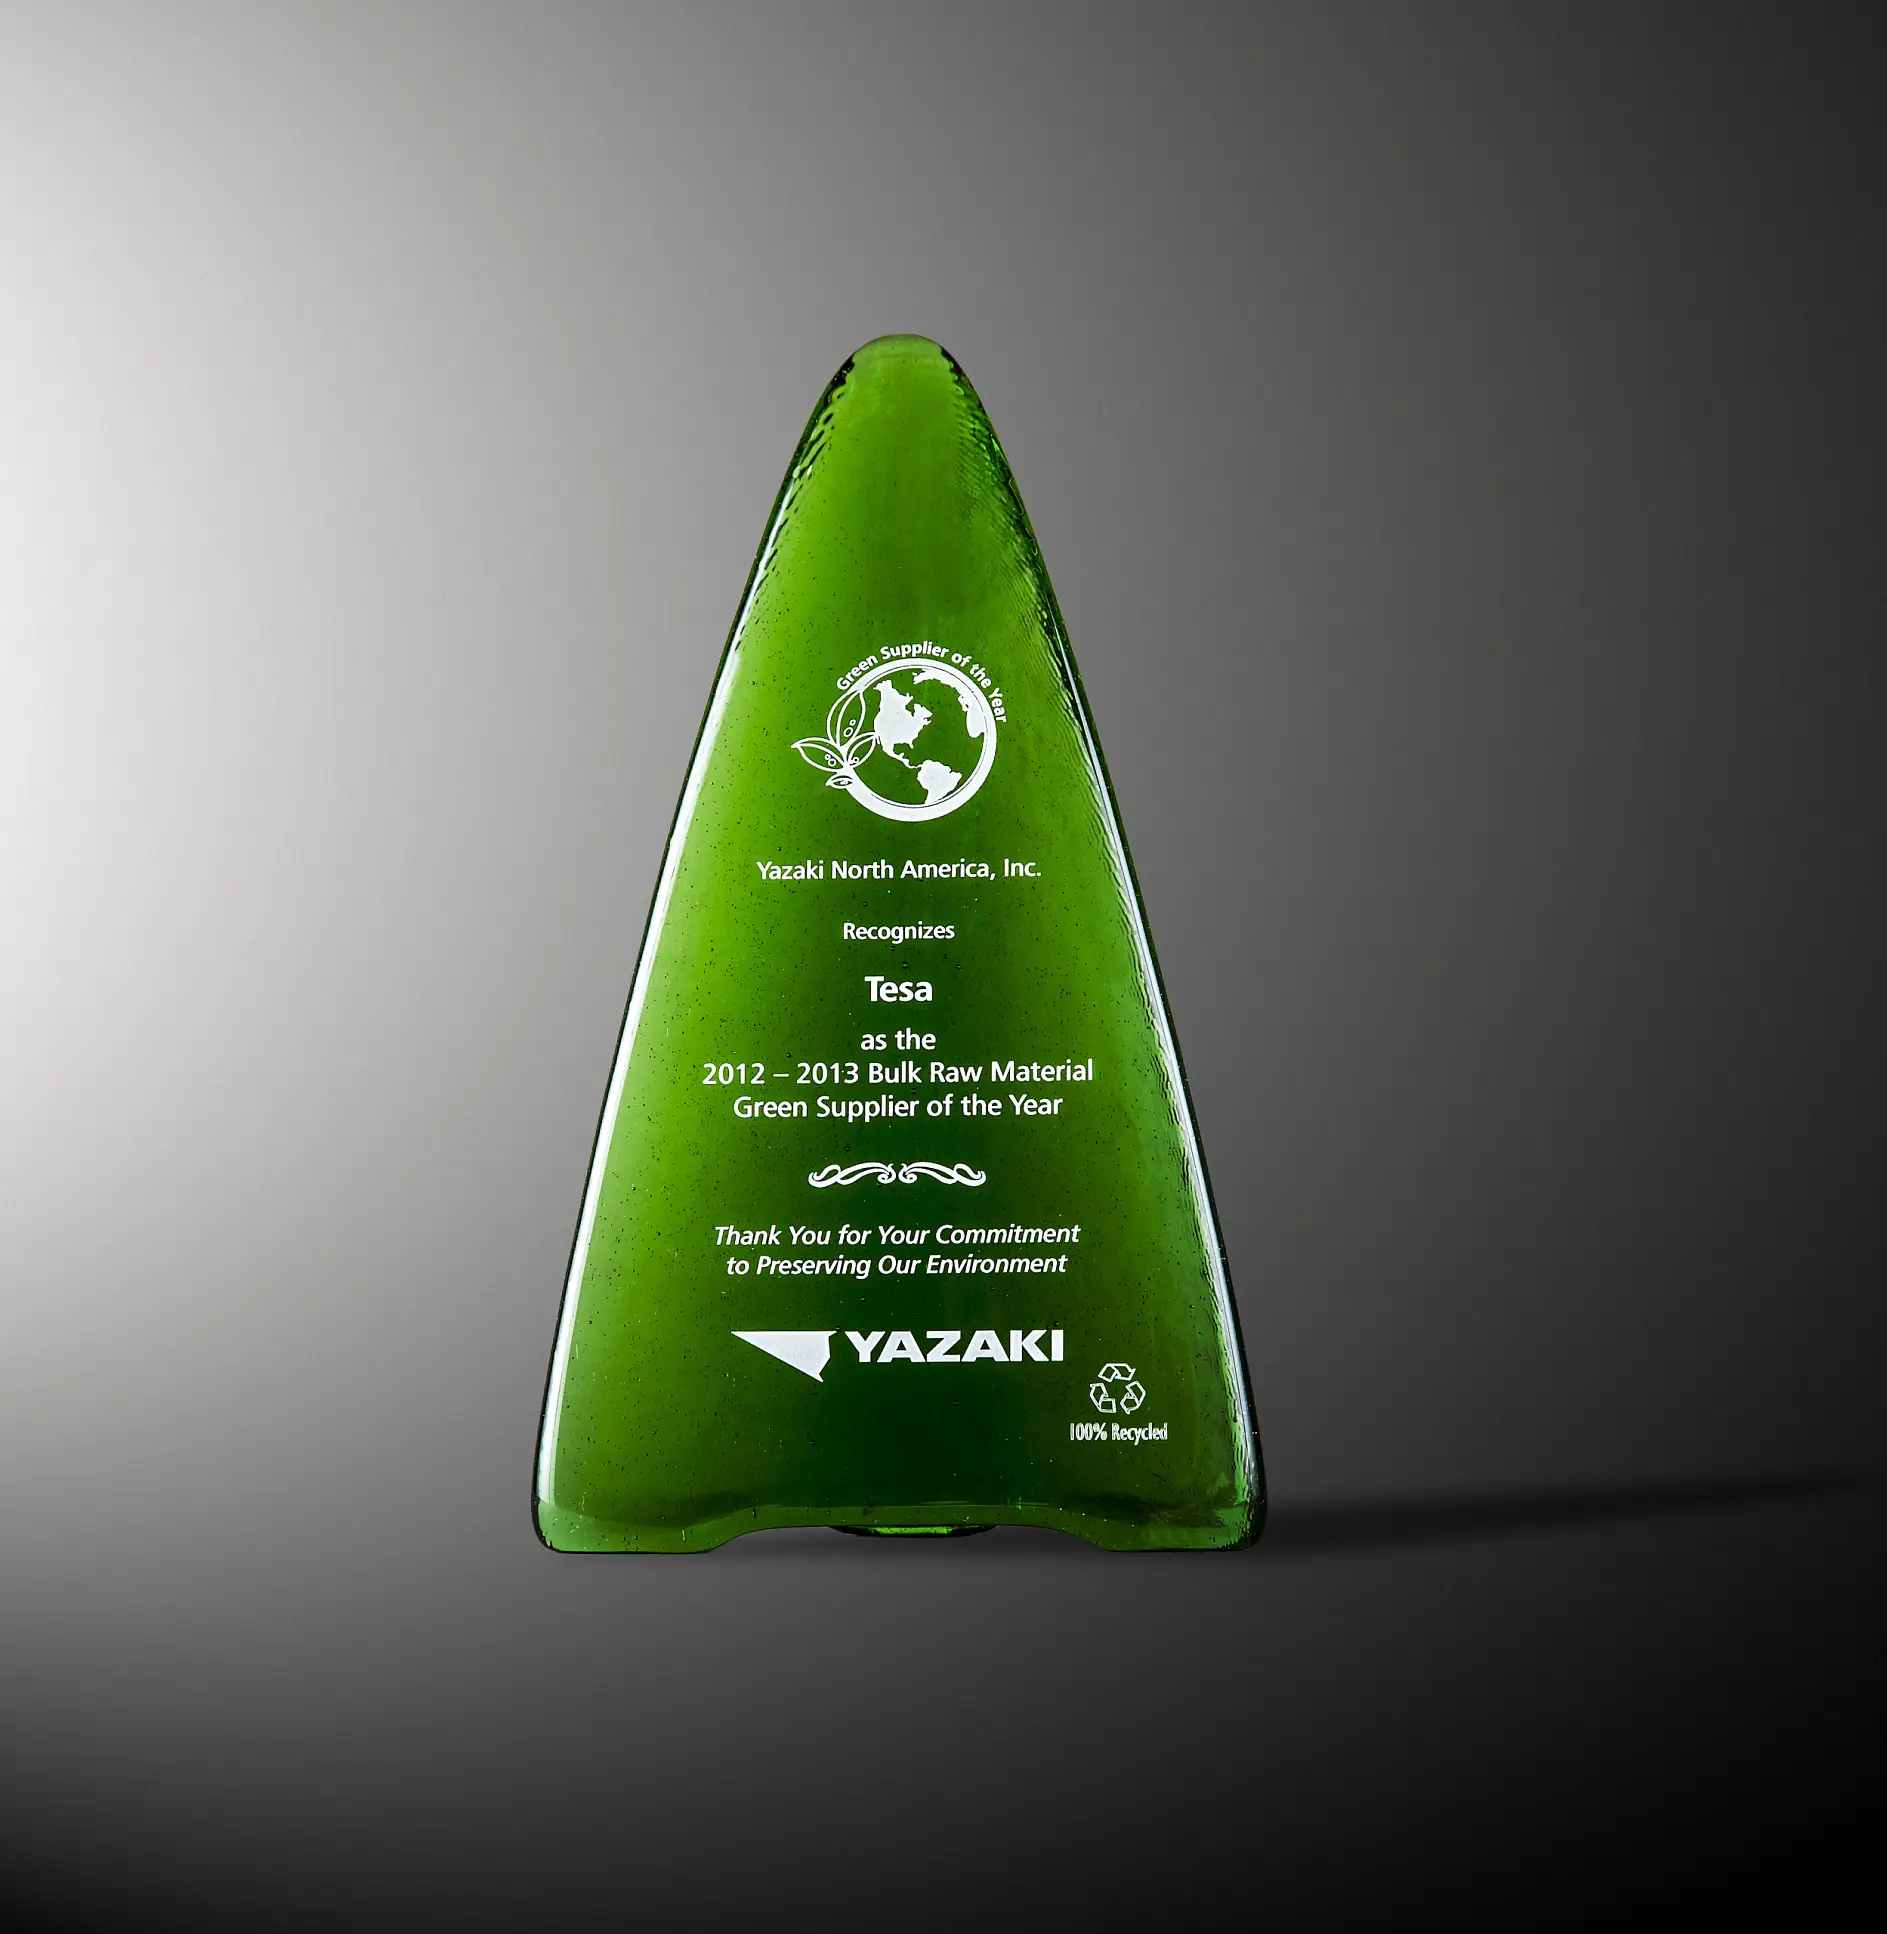 tesa tape was chosen to receive this award due to its many initiatives related to responsible tape manufacturing practices, including emissions, waste, and energy usage reductions, all resulting in minimizing the company’s impact on the environment